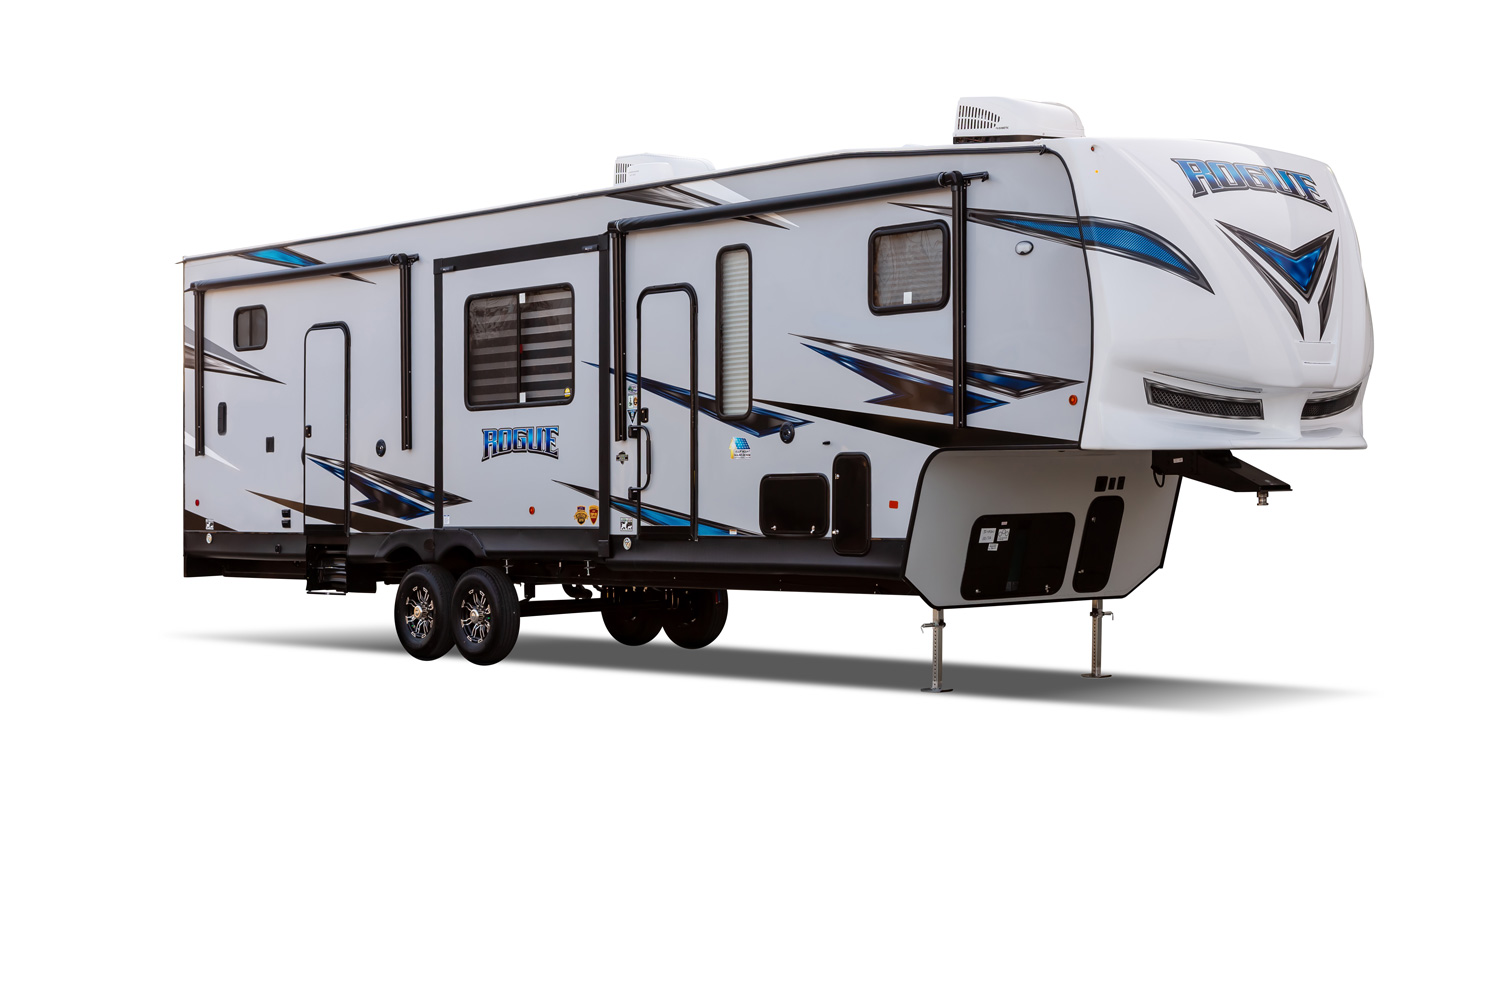 Buy Toy Haulersat 1st Choice Trailers & Campers